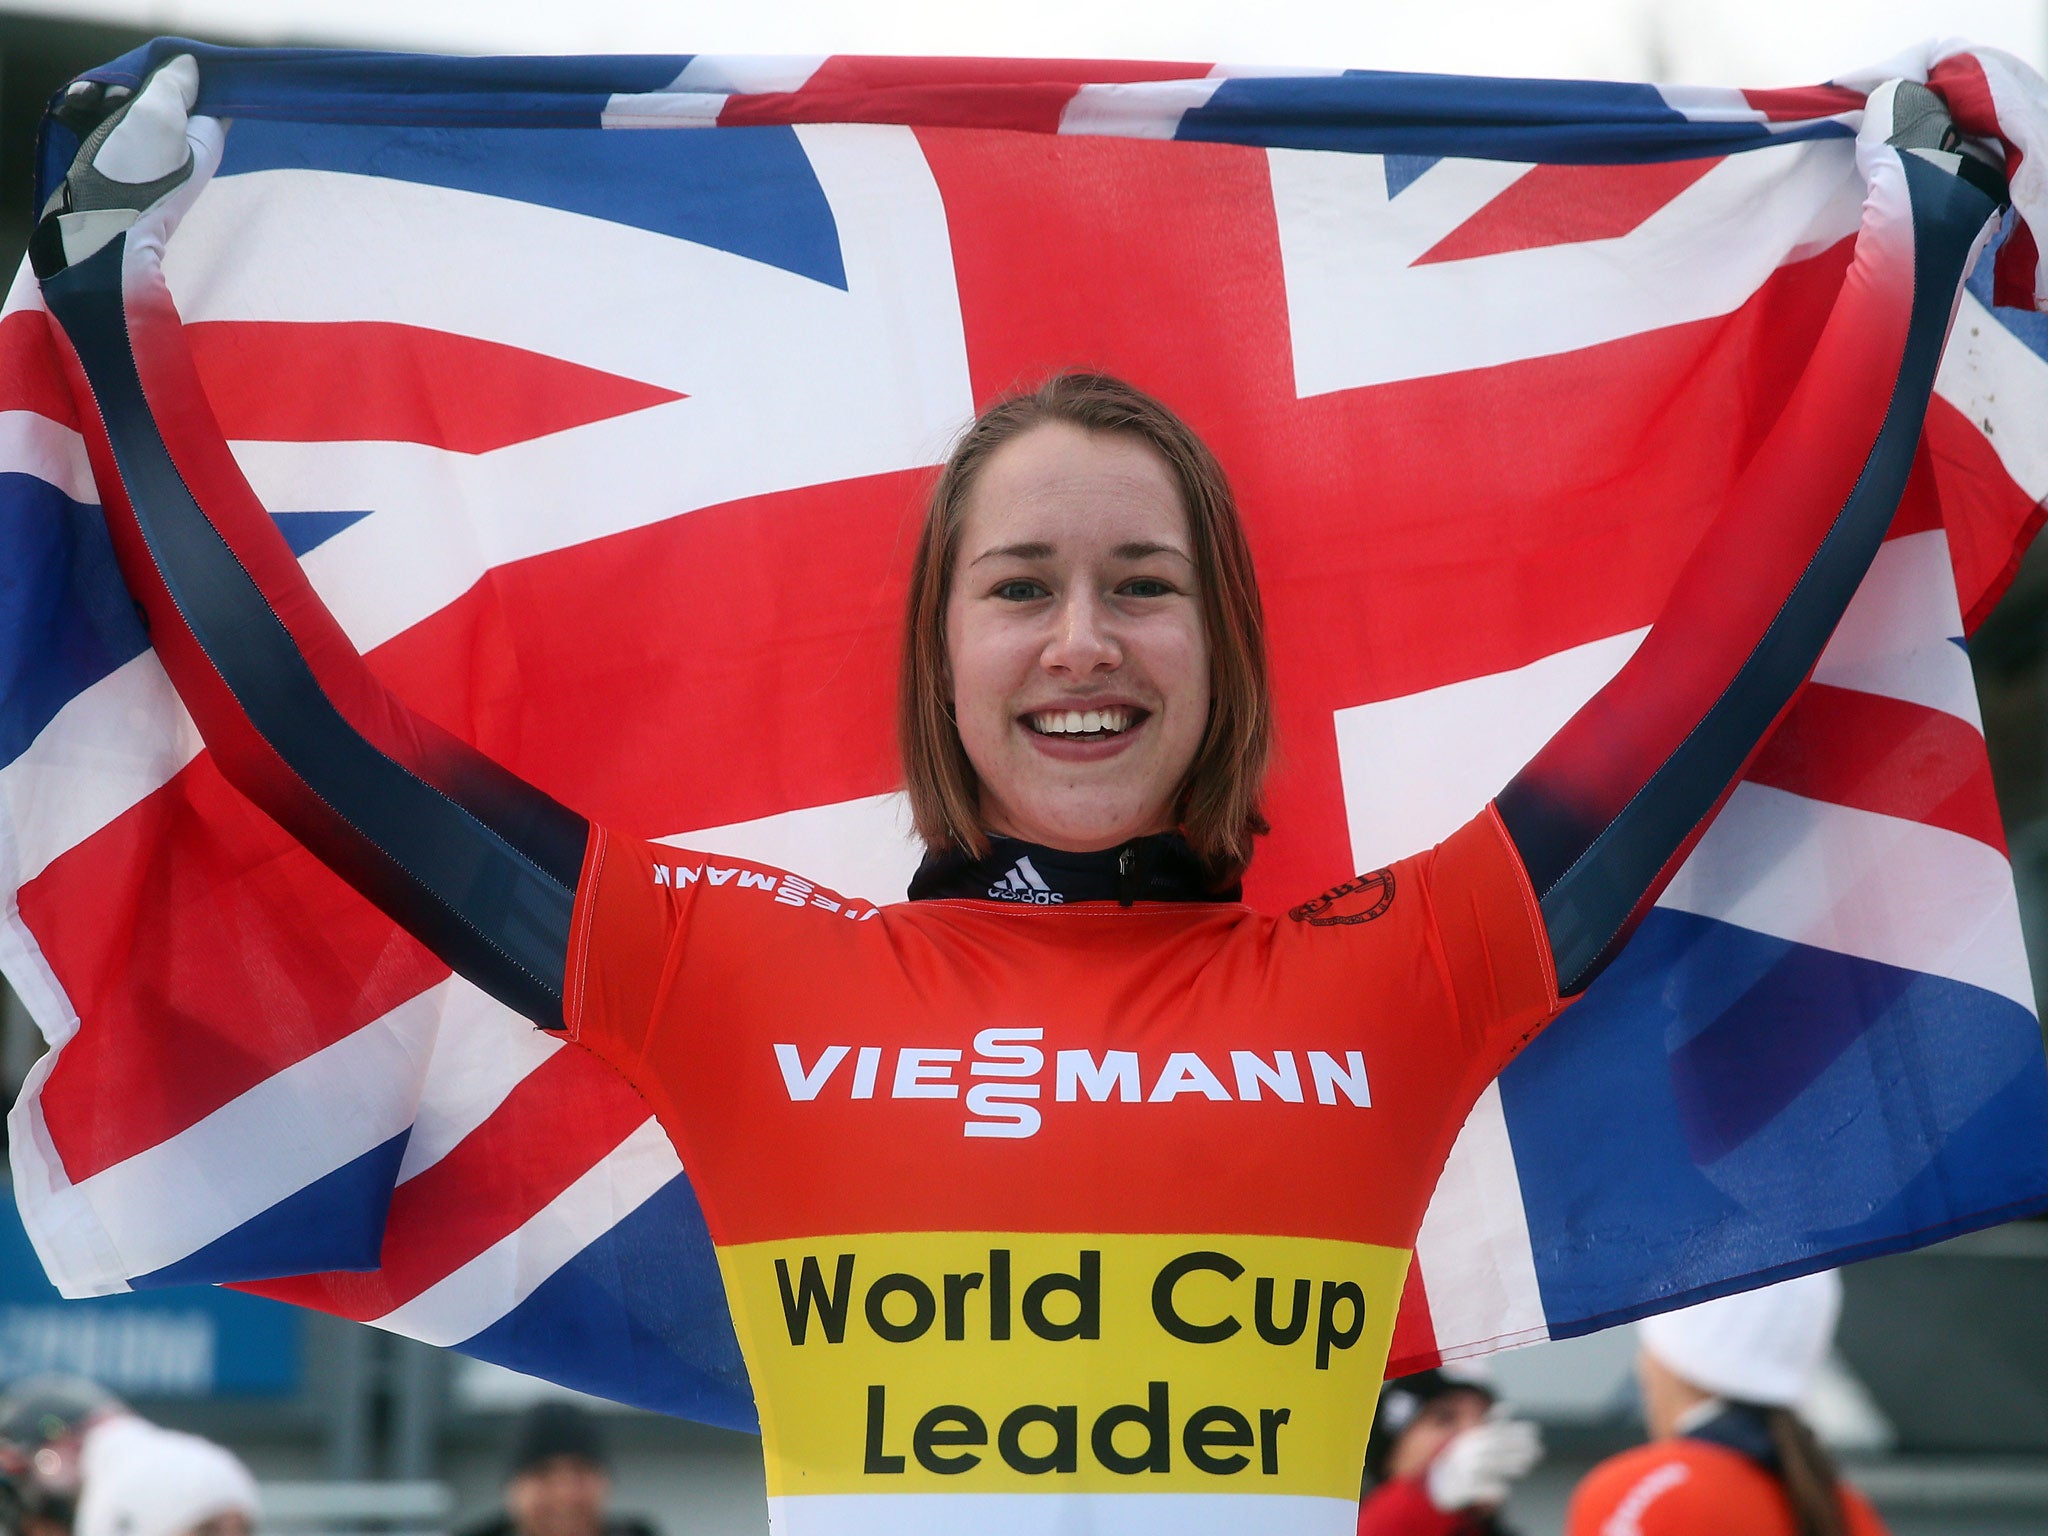 Lizzy Yarnold is the Skeleton world number one